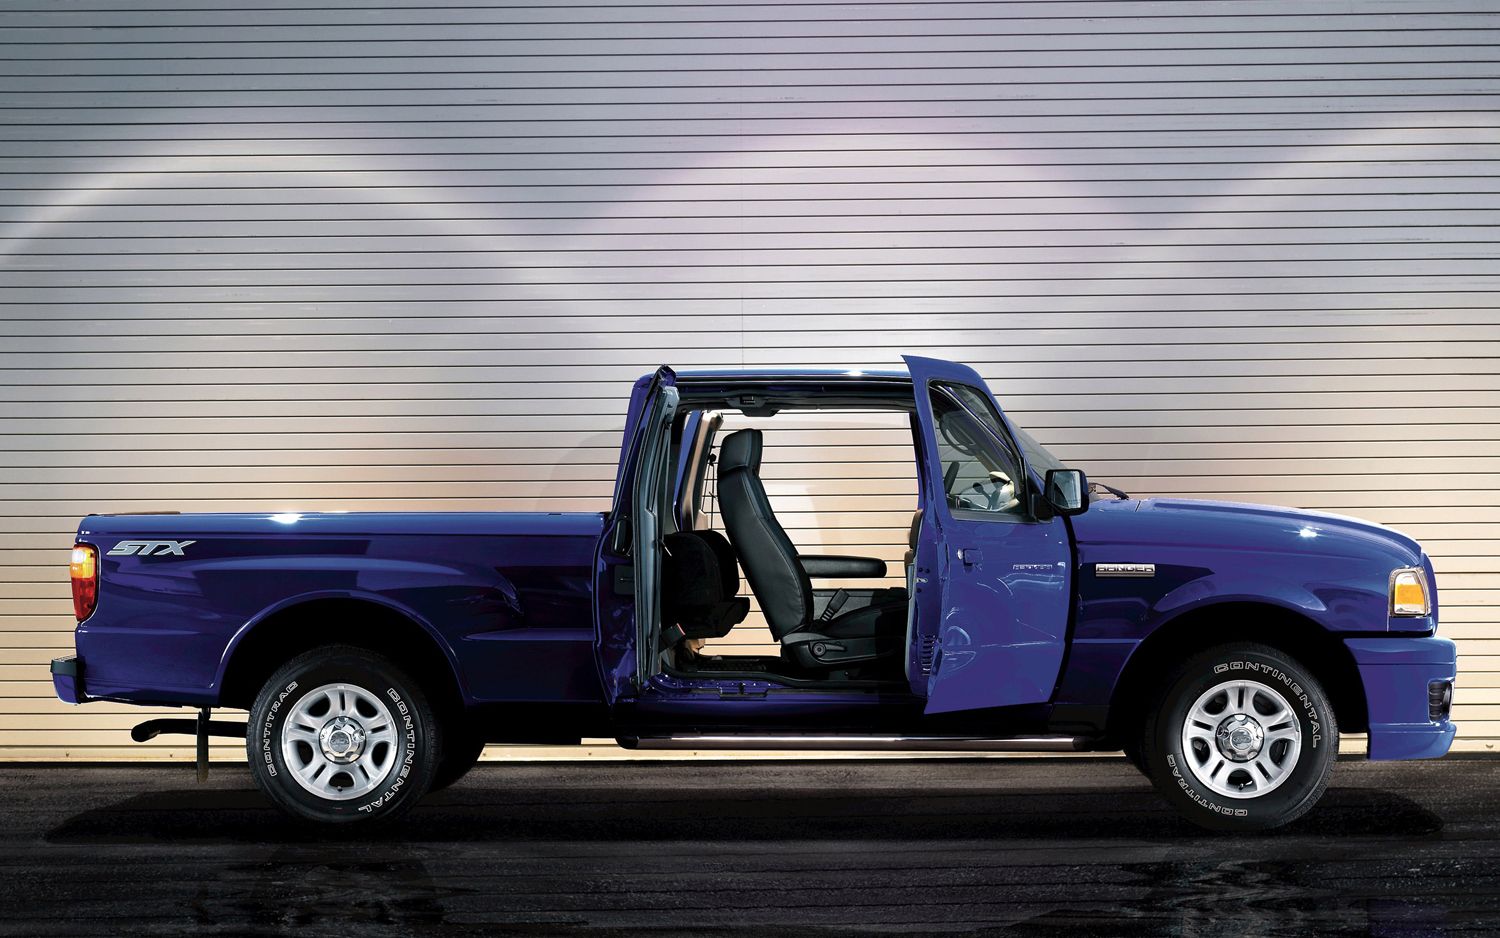 Ford Ranger Backgrounds, Compatible - PC, Mobile, Gadgets| 1500x938 px